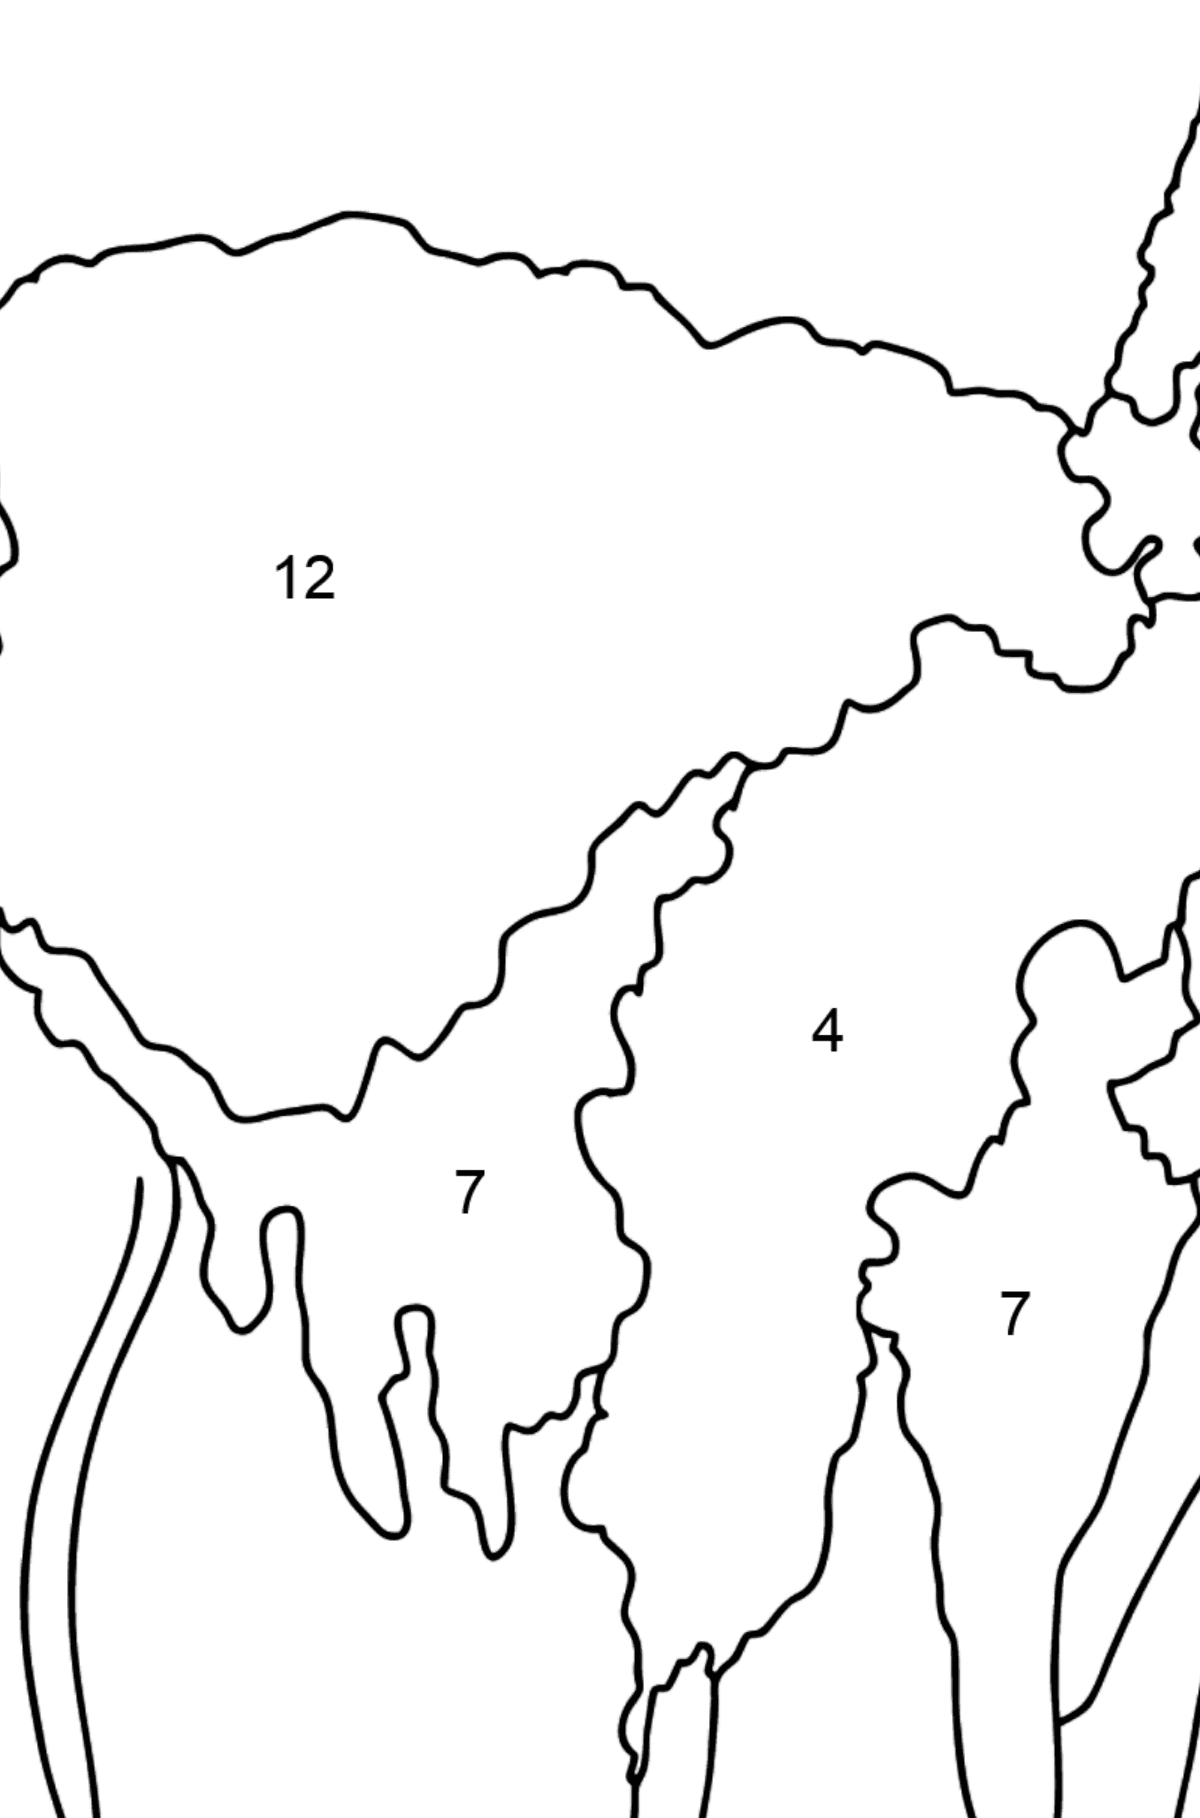 Coloring Page - A Lama is Looking Haughtily - Coloring by Numbers for Kids